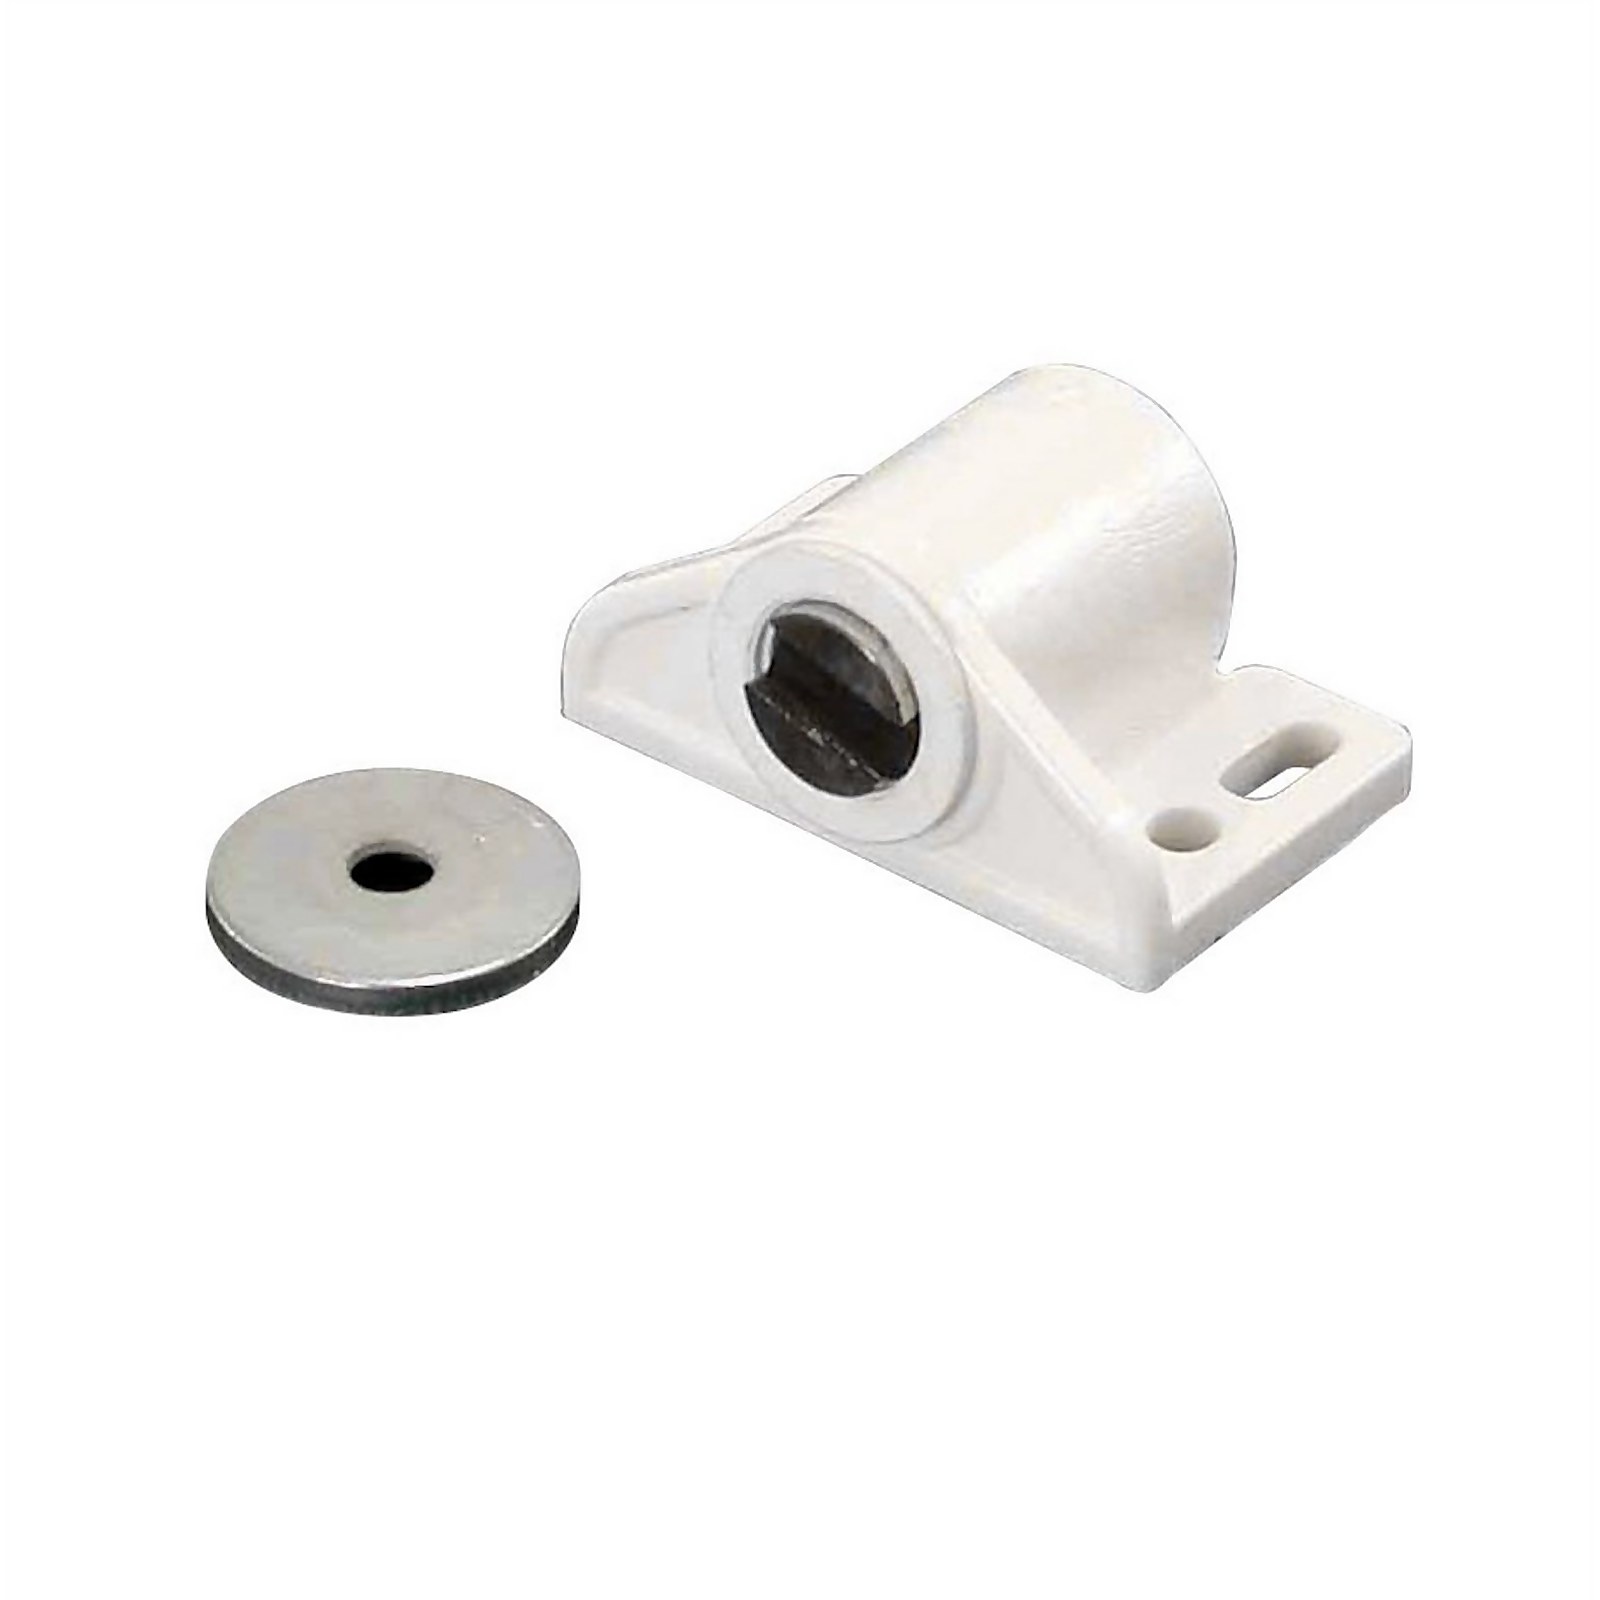 Photo of Magnetic Catch - White - 33 X 26 X 17mm - 2 Pack